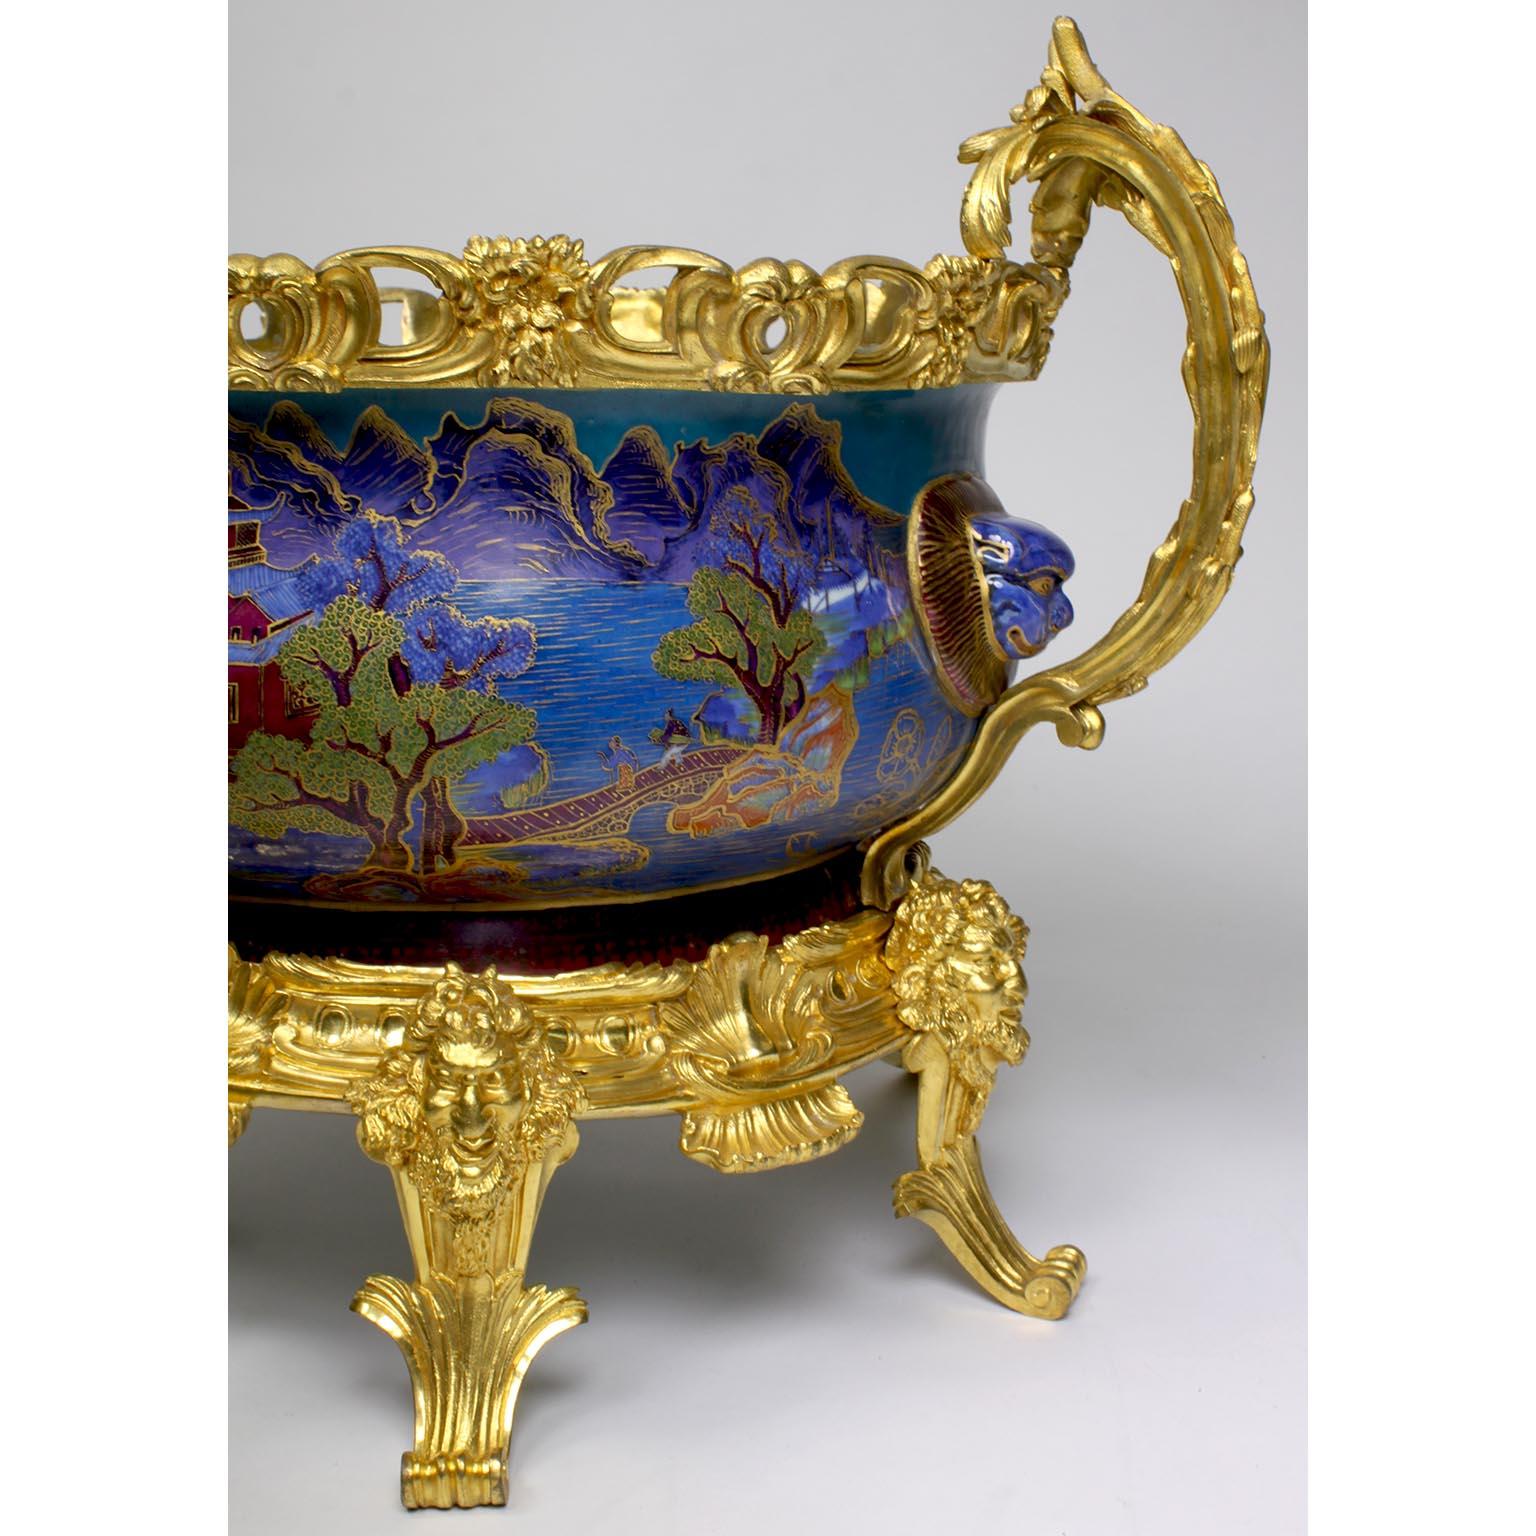 Chinese Export Famille Verte Porcelain & French Ormolu Chinoiserie Centerpiece For Sale 4